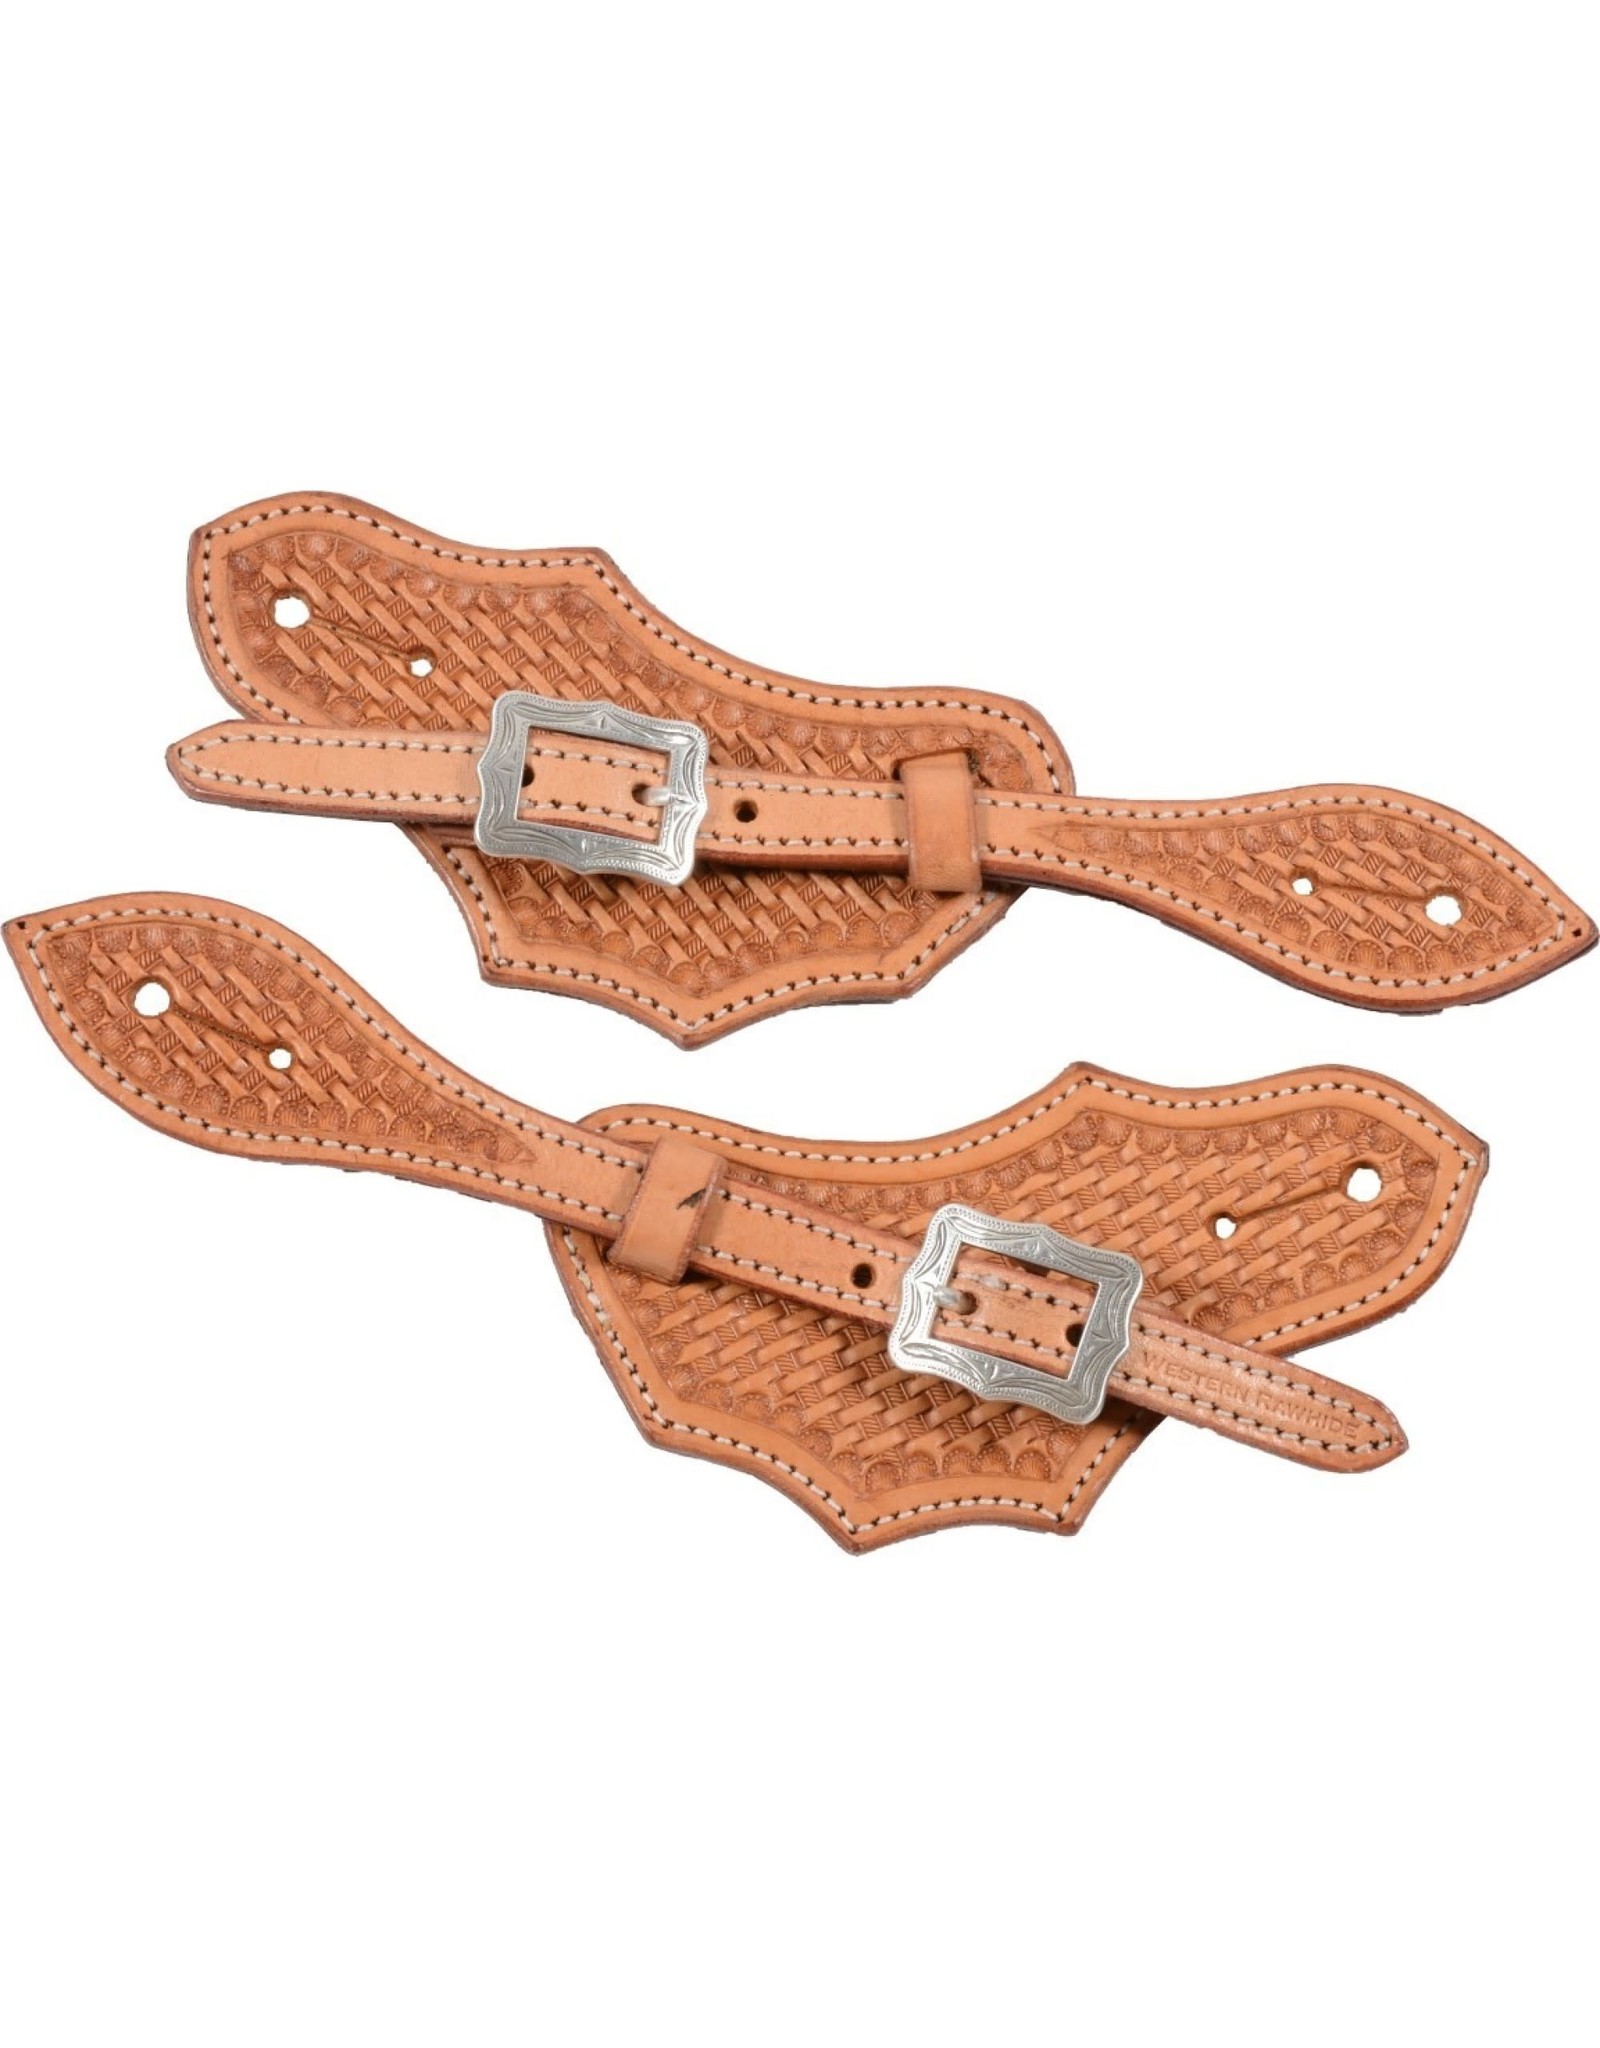 Country Legend Country Legend Basketweave Ladies Spur Strap